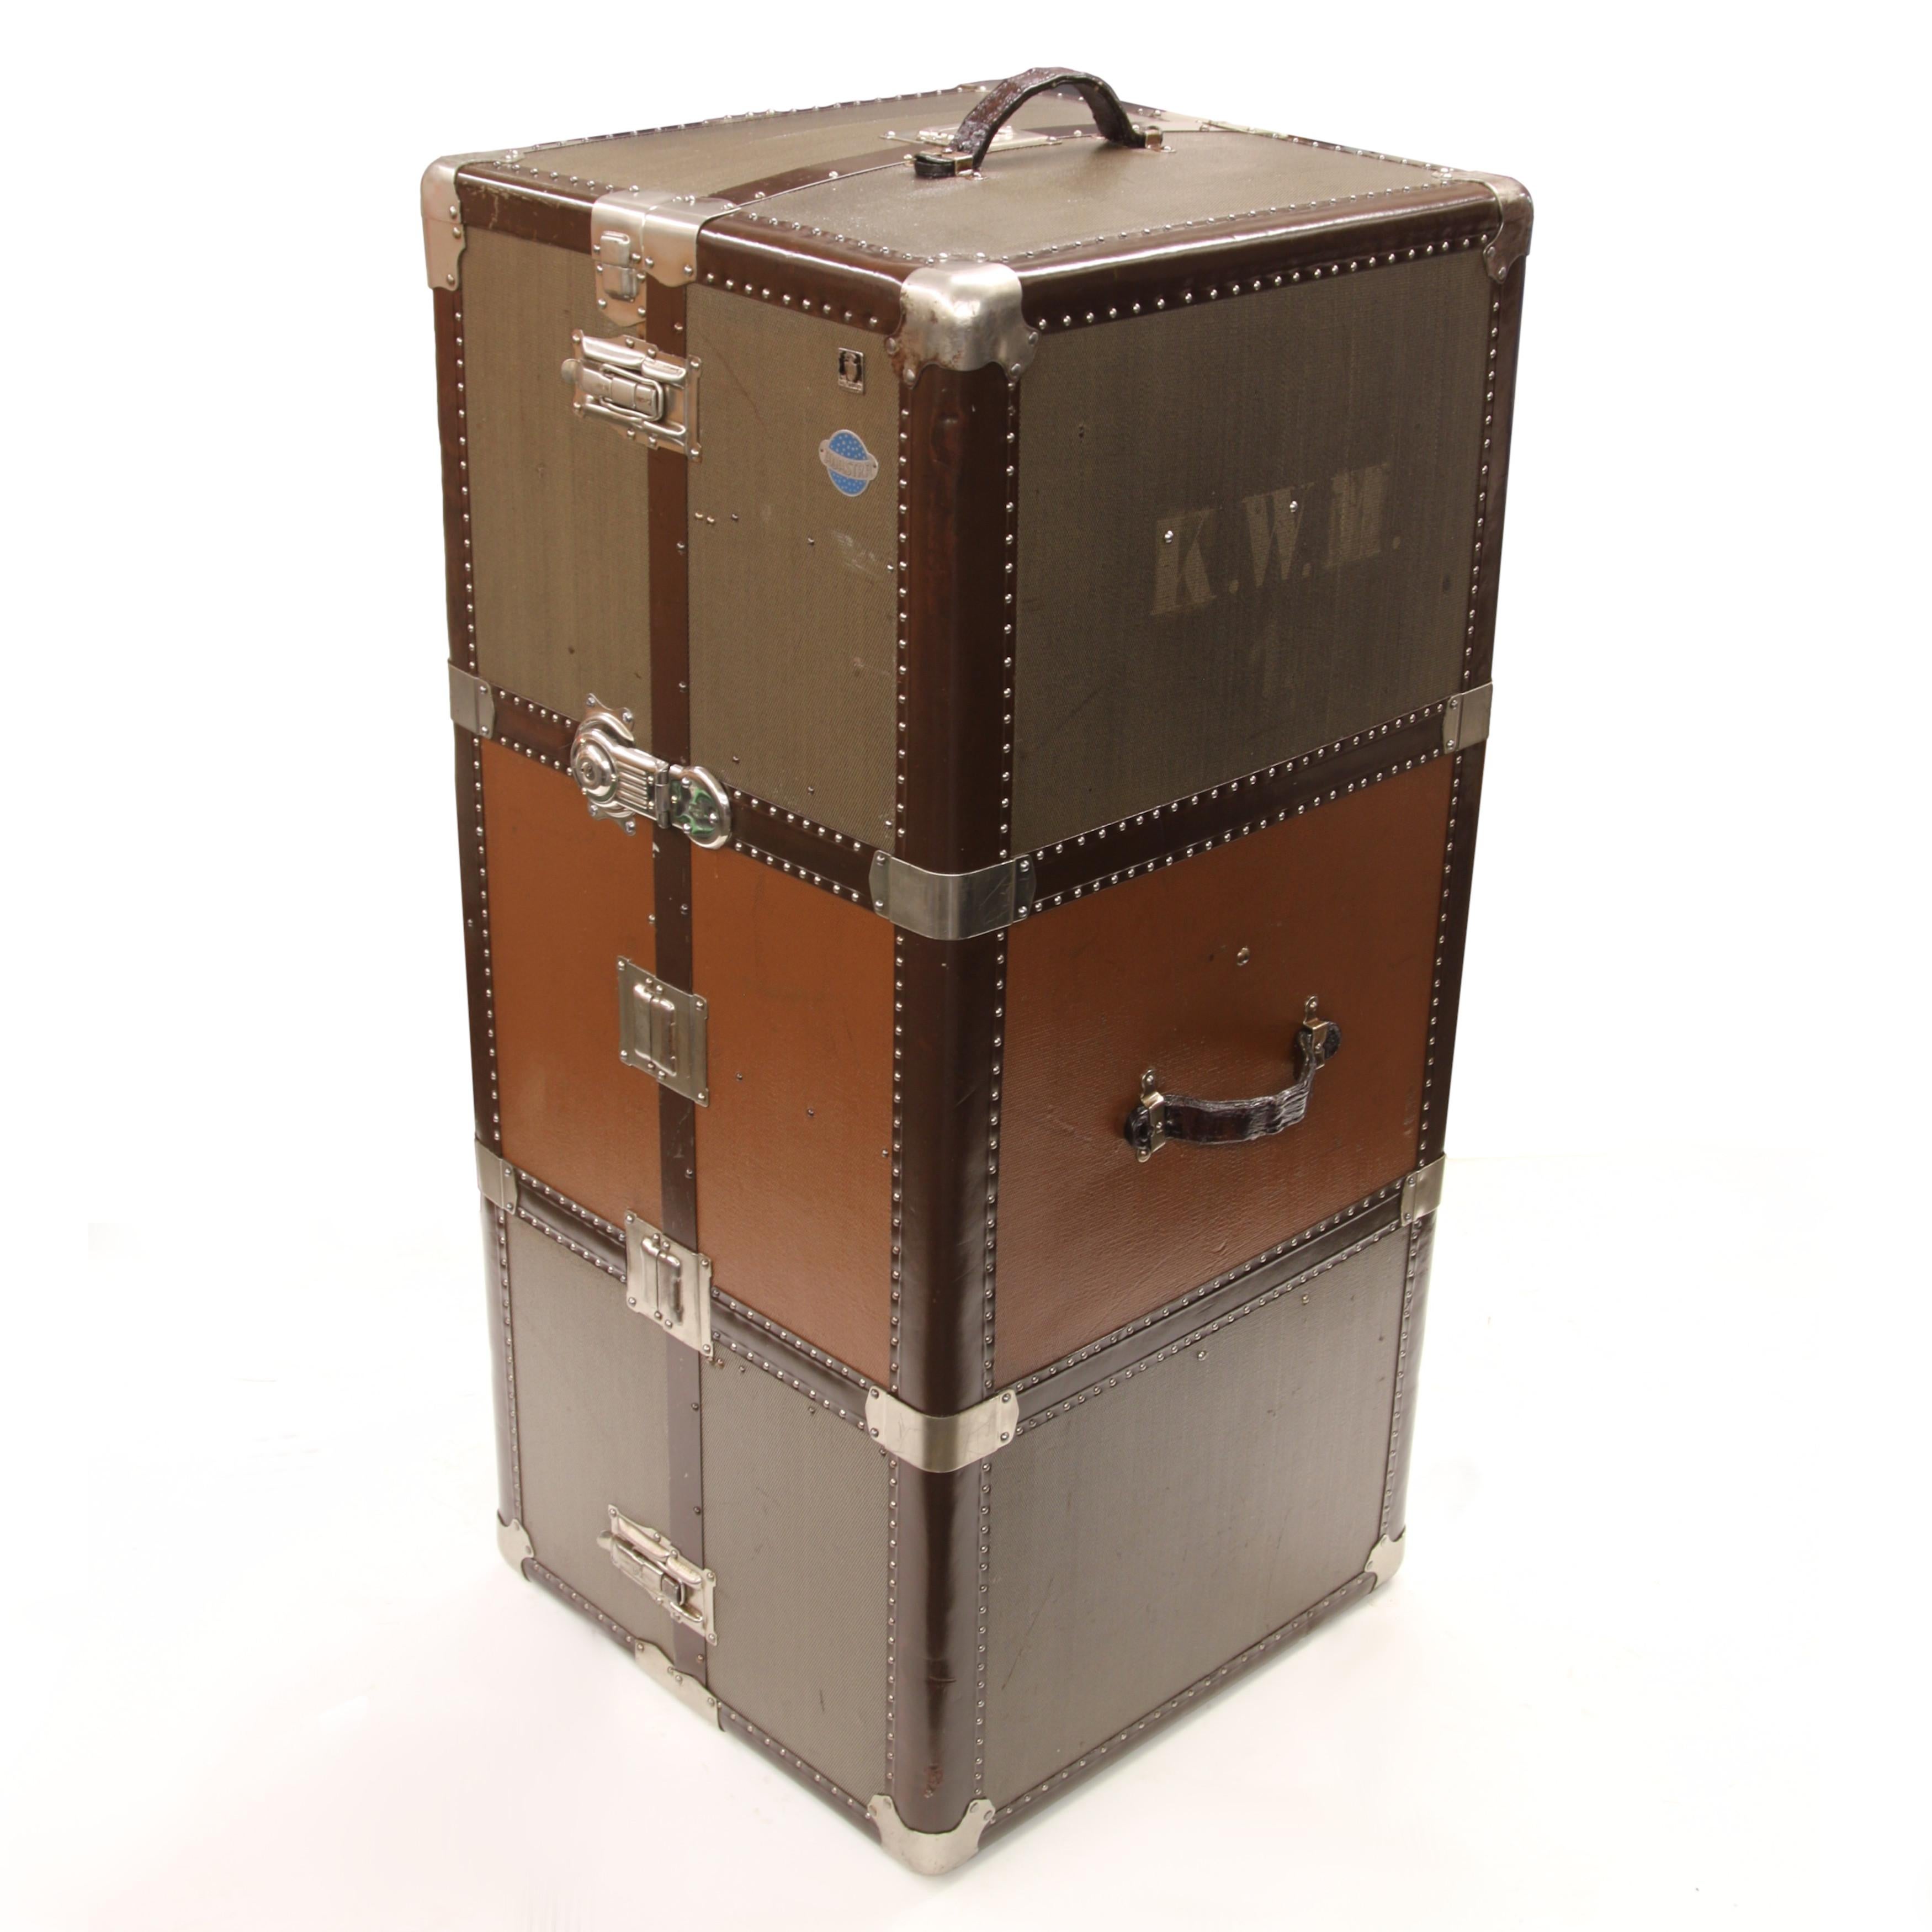 Wonderful 1920's era Steamer Trunk made by Adastra for the renowned Waldbauer, 